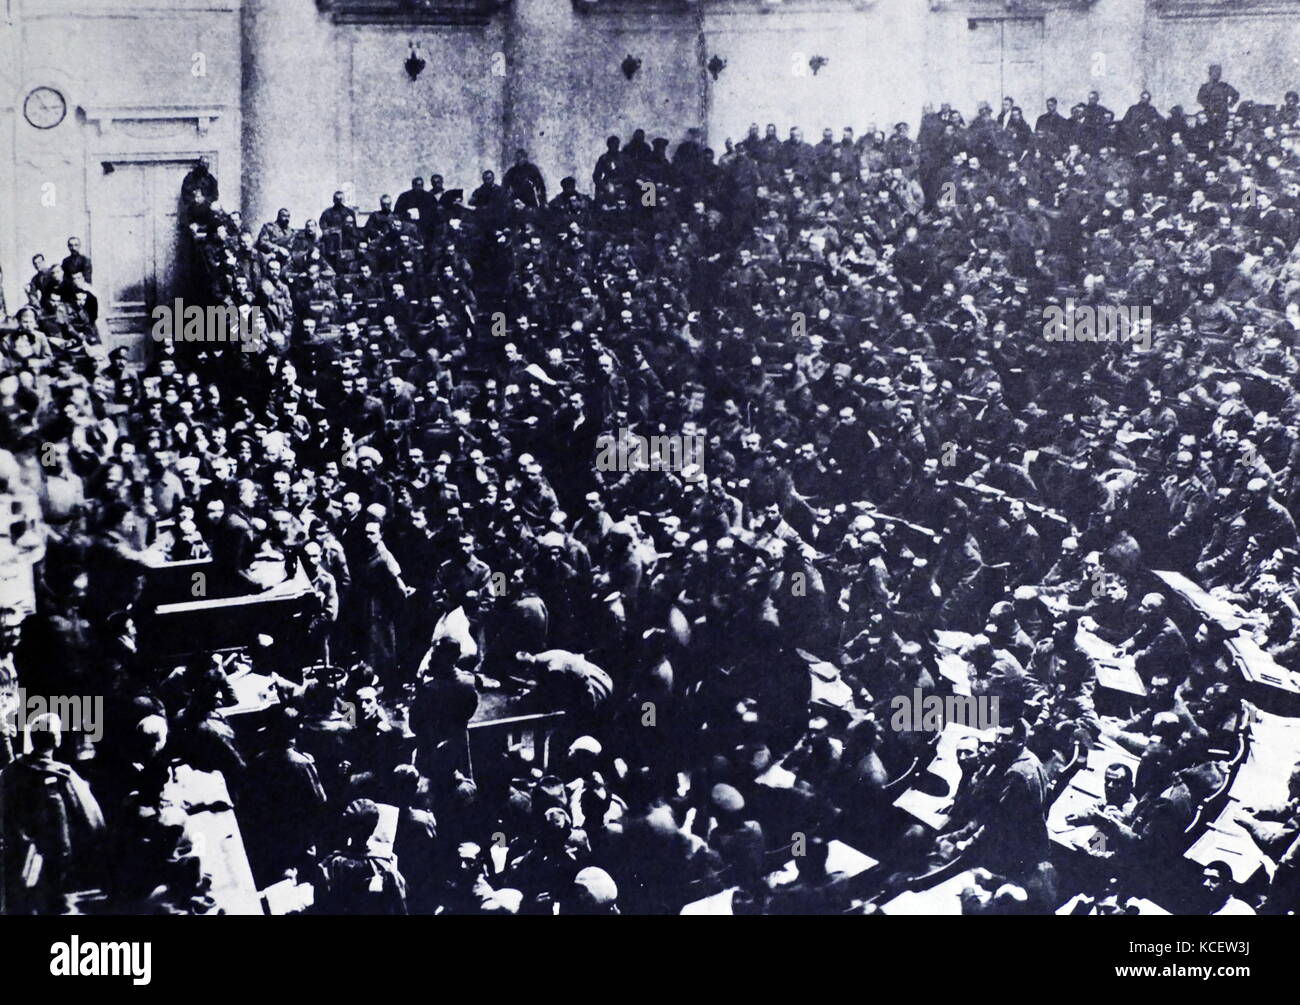 The Petrograd Soviet of Workers' and Soldiers' Deputies; a city council of Petrograd (Saint Petersburg). During the revolutionary days, the council tried to extend its jurisdiction nationwide as a rival power center to the Provisional Government, in March 1917 after the February Revolution. It met in the Duma or parliament. Stock Photo